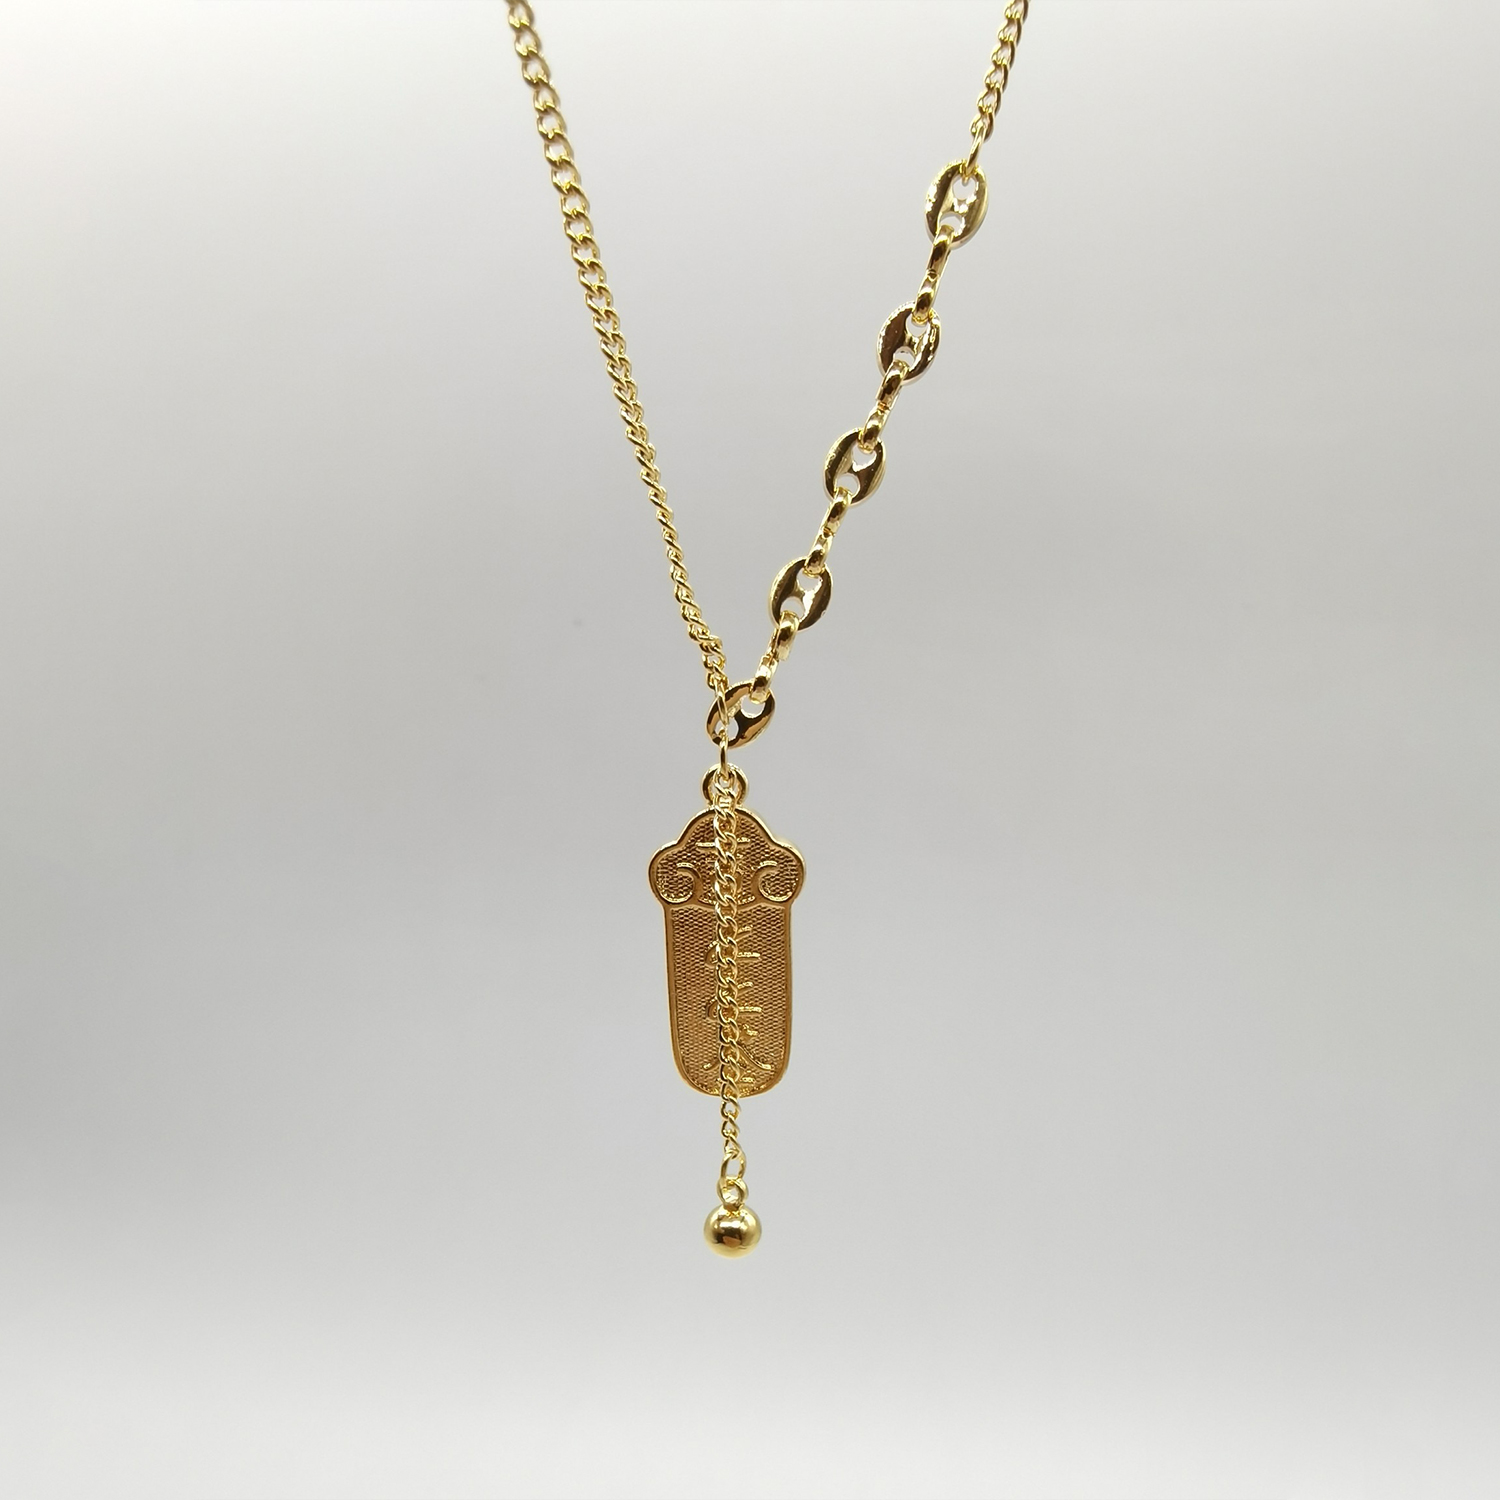 Alluvial gold vacuum electroplating 24K gold signed Xiangyun necklace